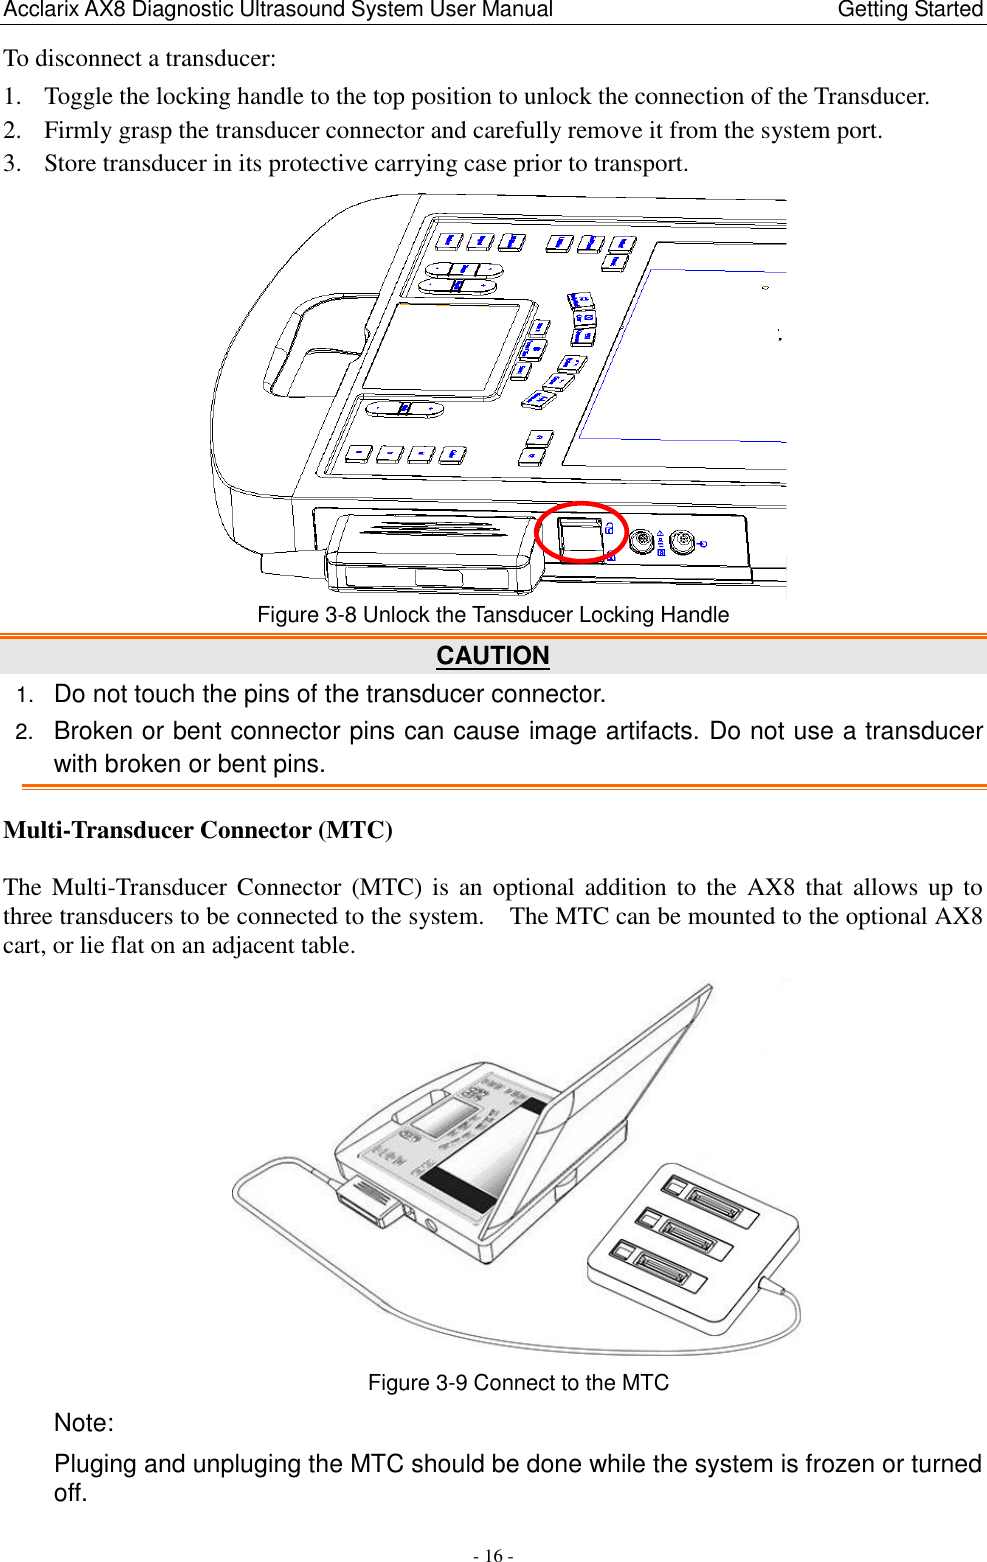 Acclarix AX8 Diagnostic Ultrasound System User Manual                                                Getting Started - 16 - To disconnect a transducer:   1. Toggle the locking handle to the top position to unlock the connection of the Transducer. 2. Firmly grasp the transducer connector and carefully remove it from the system port. 3. Store transducer in its protective carrying case prior to transport.  Figure 3-8 Unlock the Tansducer Locking Handle CAUTION 1. Do not touch the pins of the transducer connector. 2. Broken or bent connector pins can cause image artifacts. Do not use a transducer with broken or bent pins. Multi-Transducer Connector (MTC)  The Multi-Transducer Connector  (MTC) is  an  optional  addition  to  the  AX8 that  allows  up  to three transducers to be connected to the system.    The MTC can be mounted to the optional AX8 cart, or lie flat on an adjacent table.  Figure 3-9 Connect to the MTC Note: Pluging and unpluging the MTC should be done while the system is frozen or turned off. 